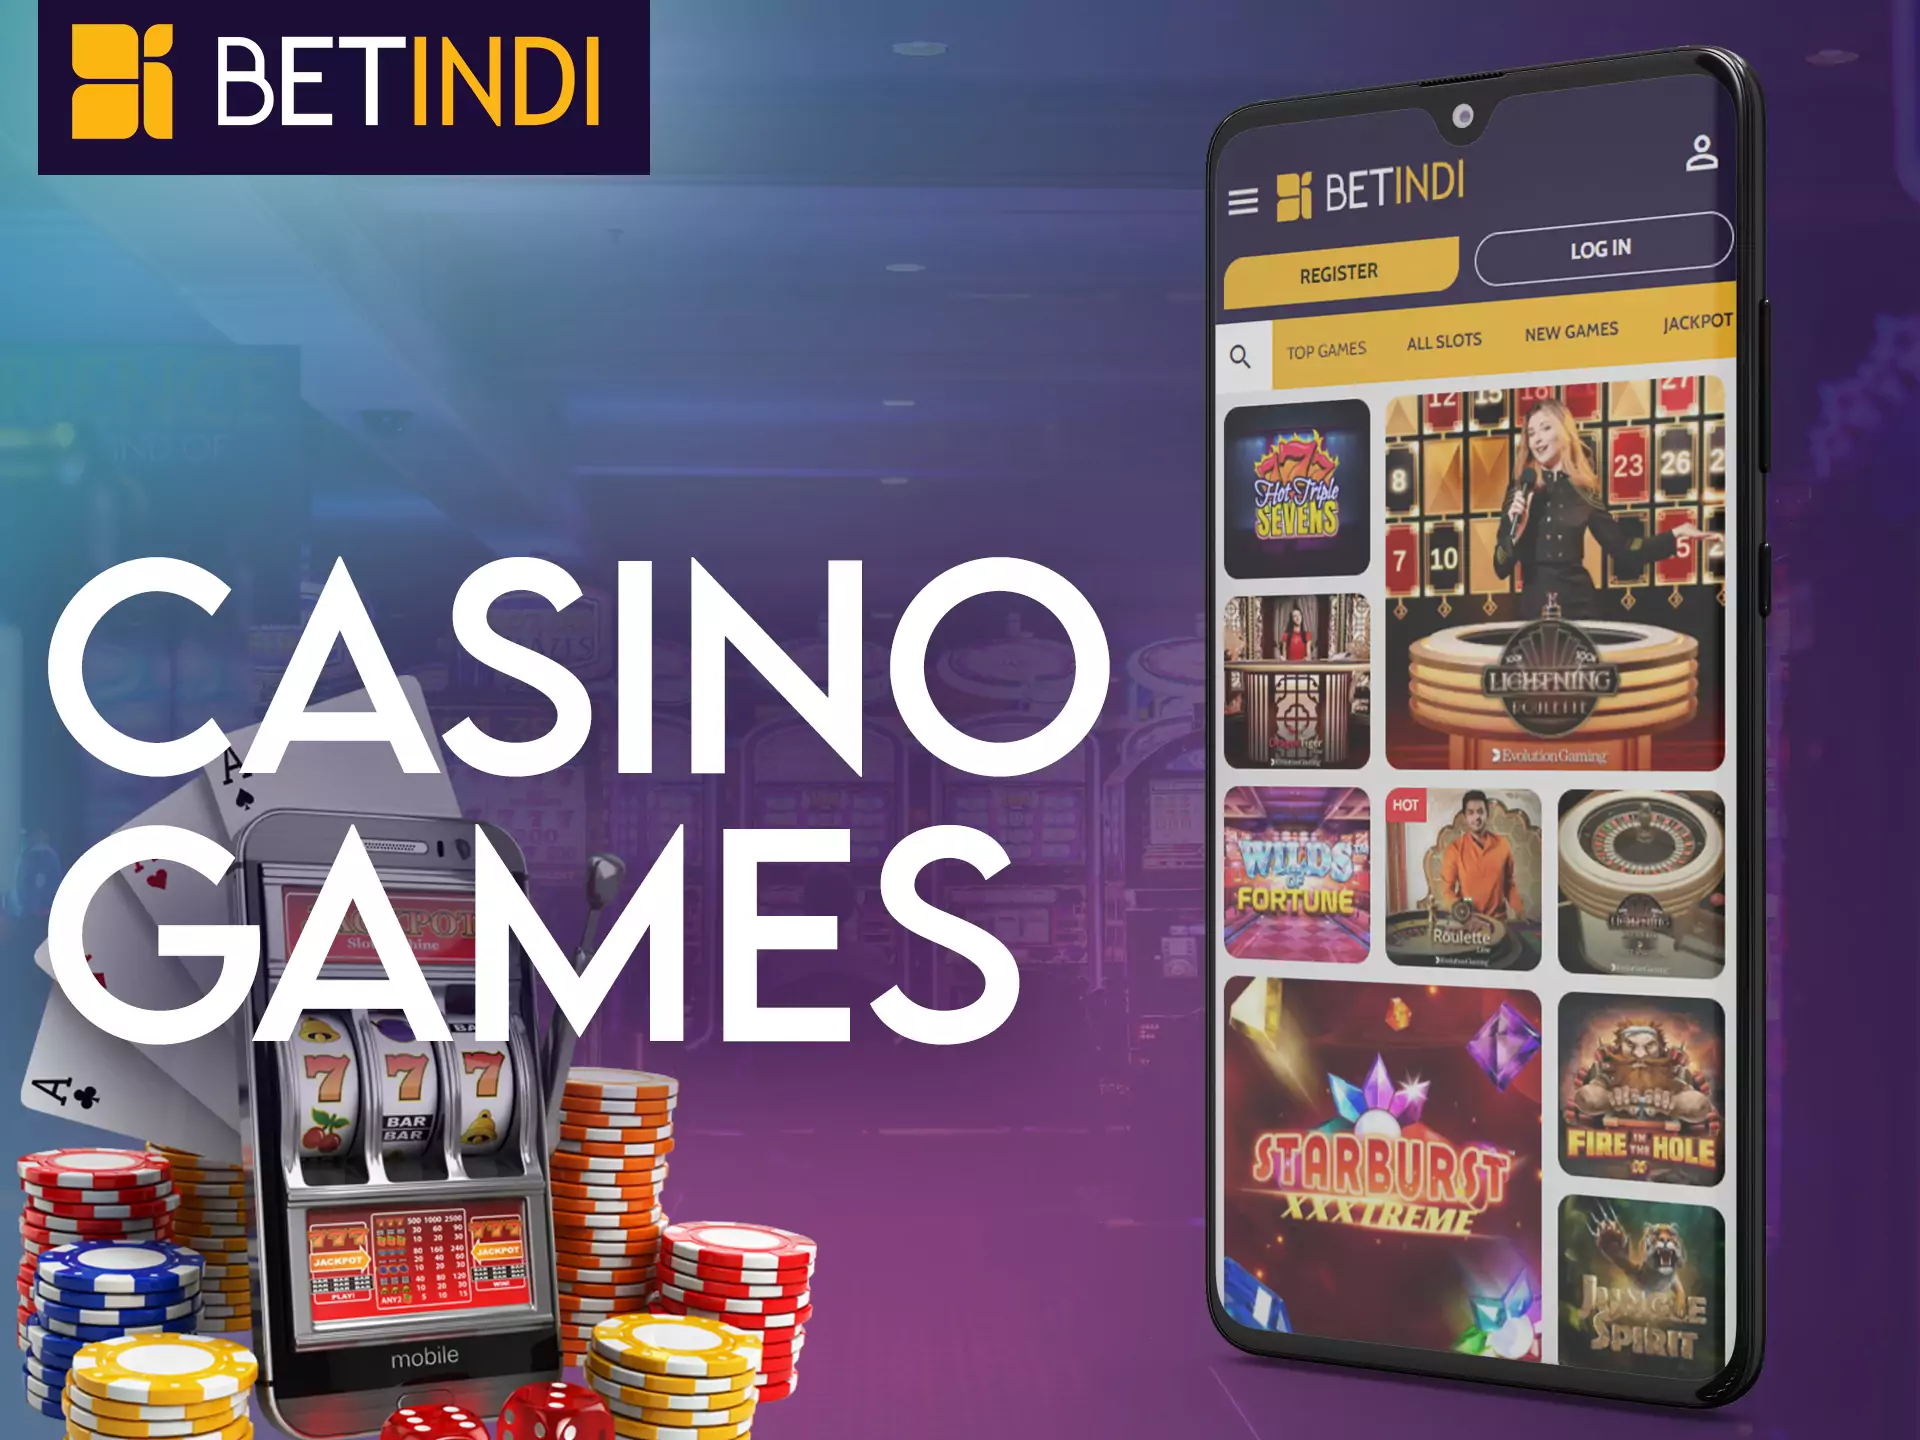 Find your favorite game from the big list of Betindi Casinos.